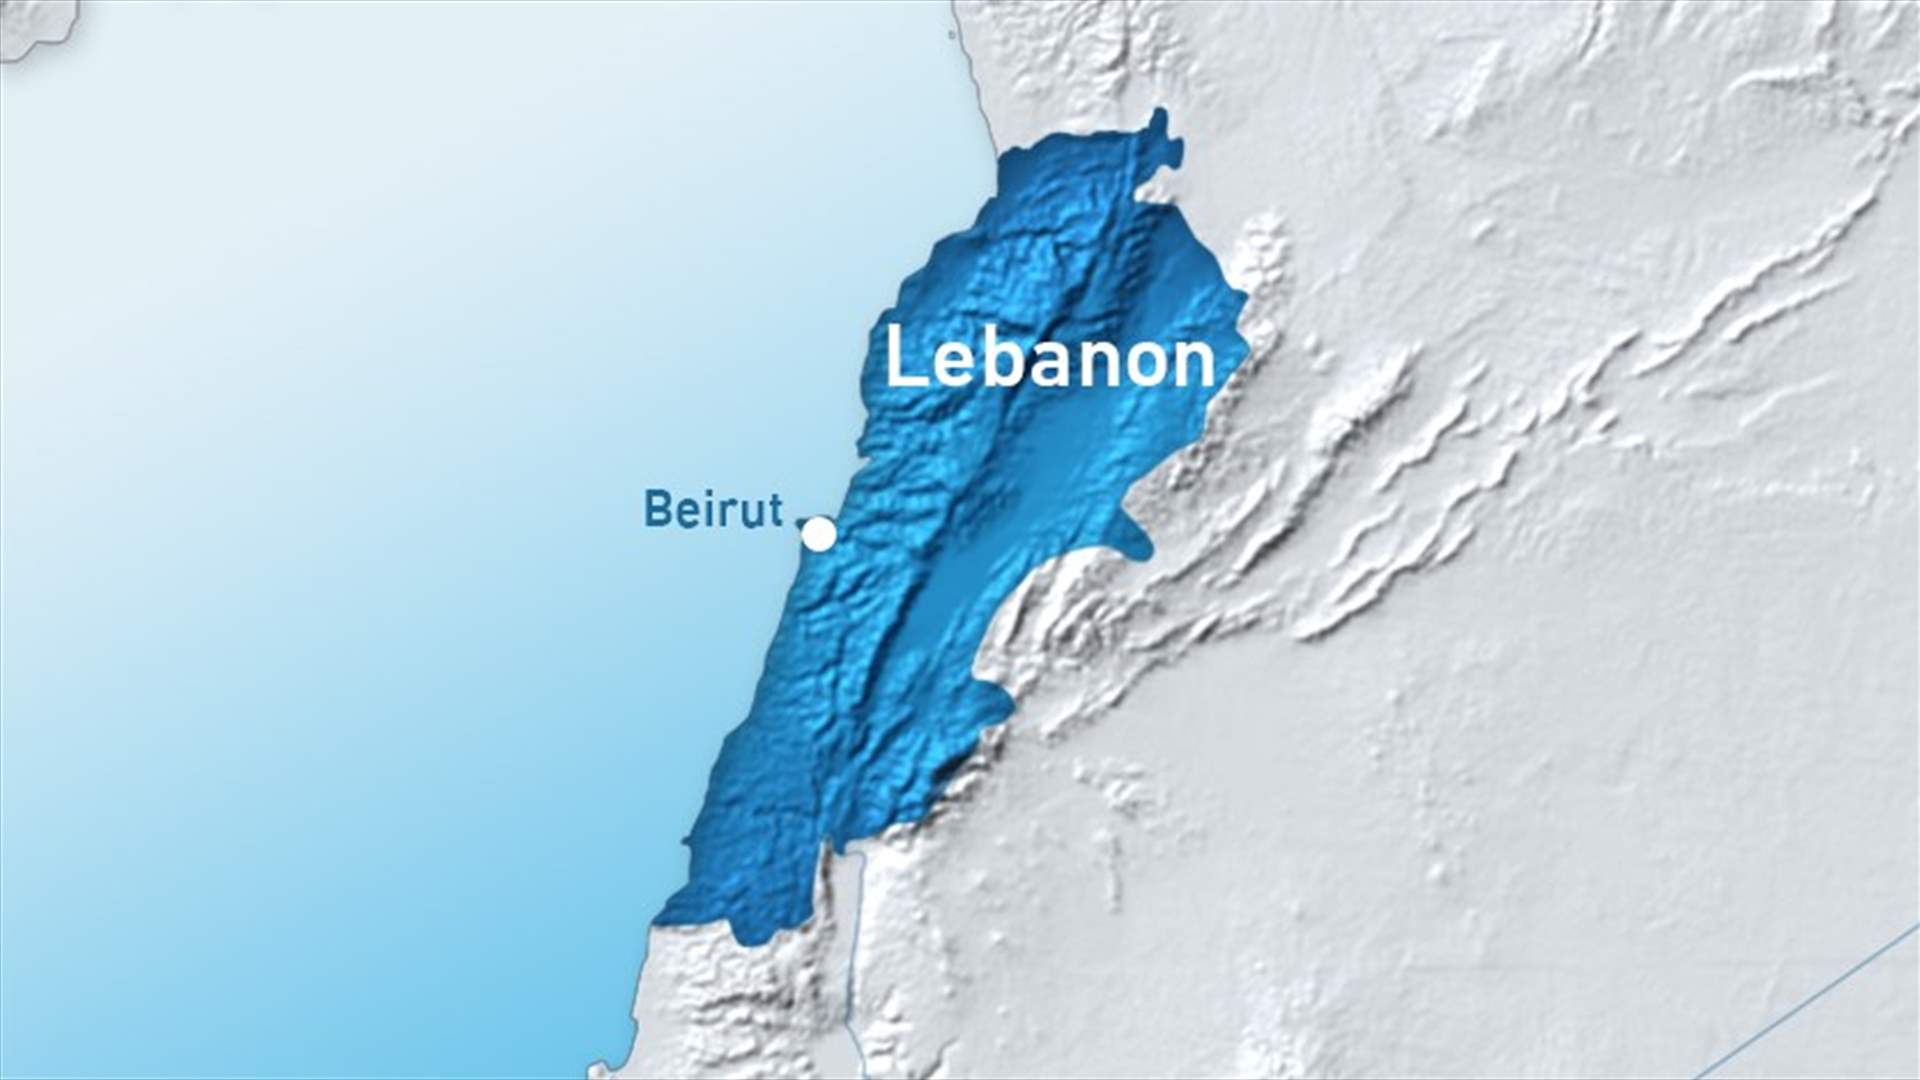 Syrian nationals arrested for illegally entering Lebanon 